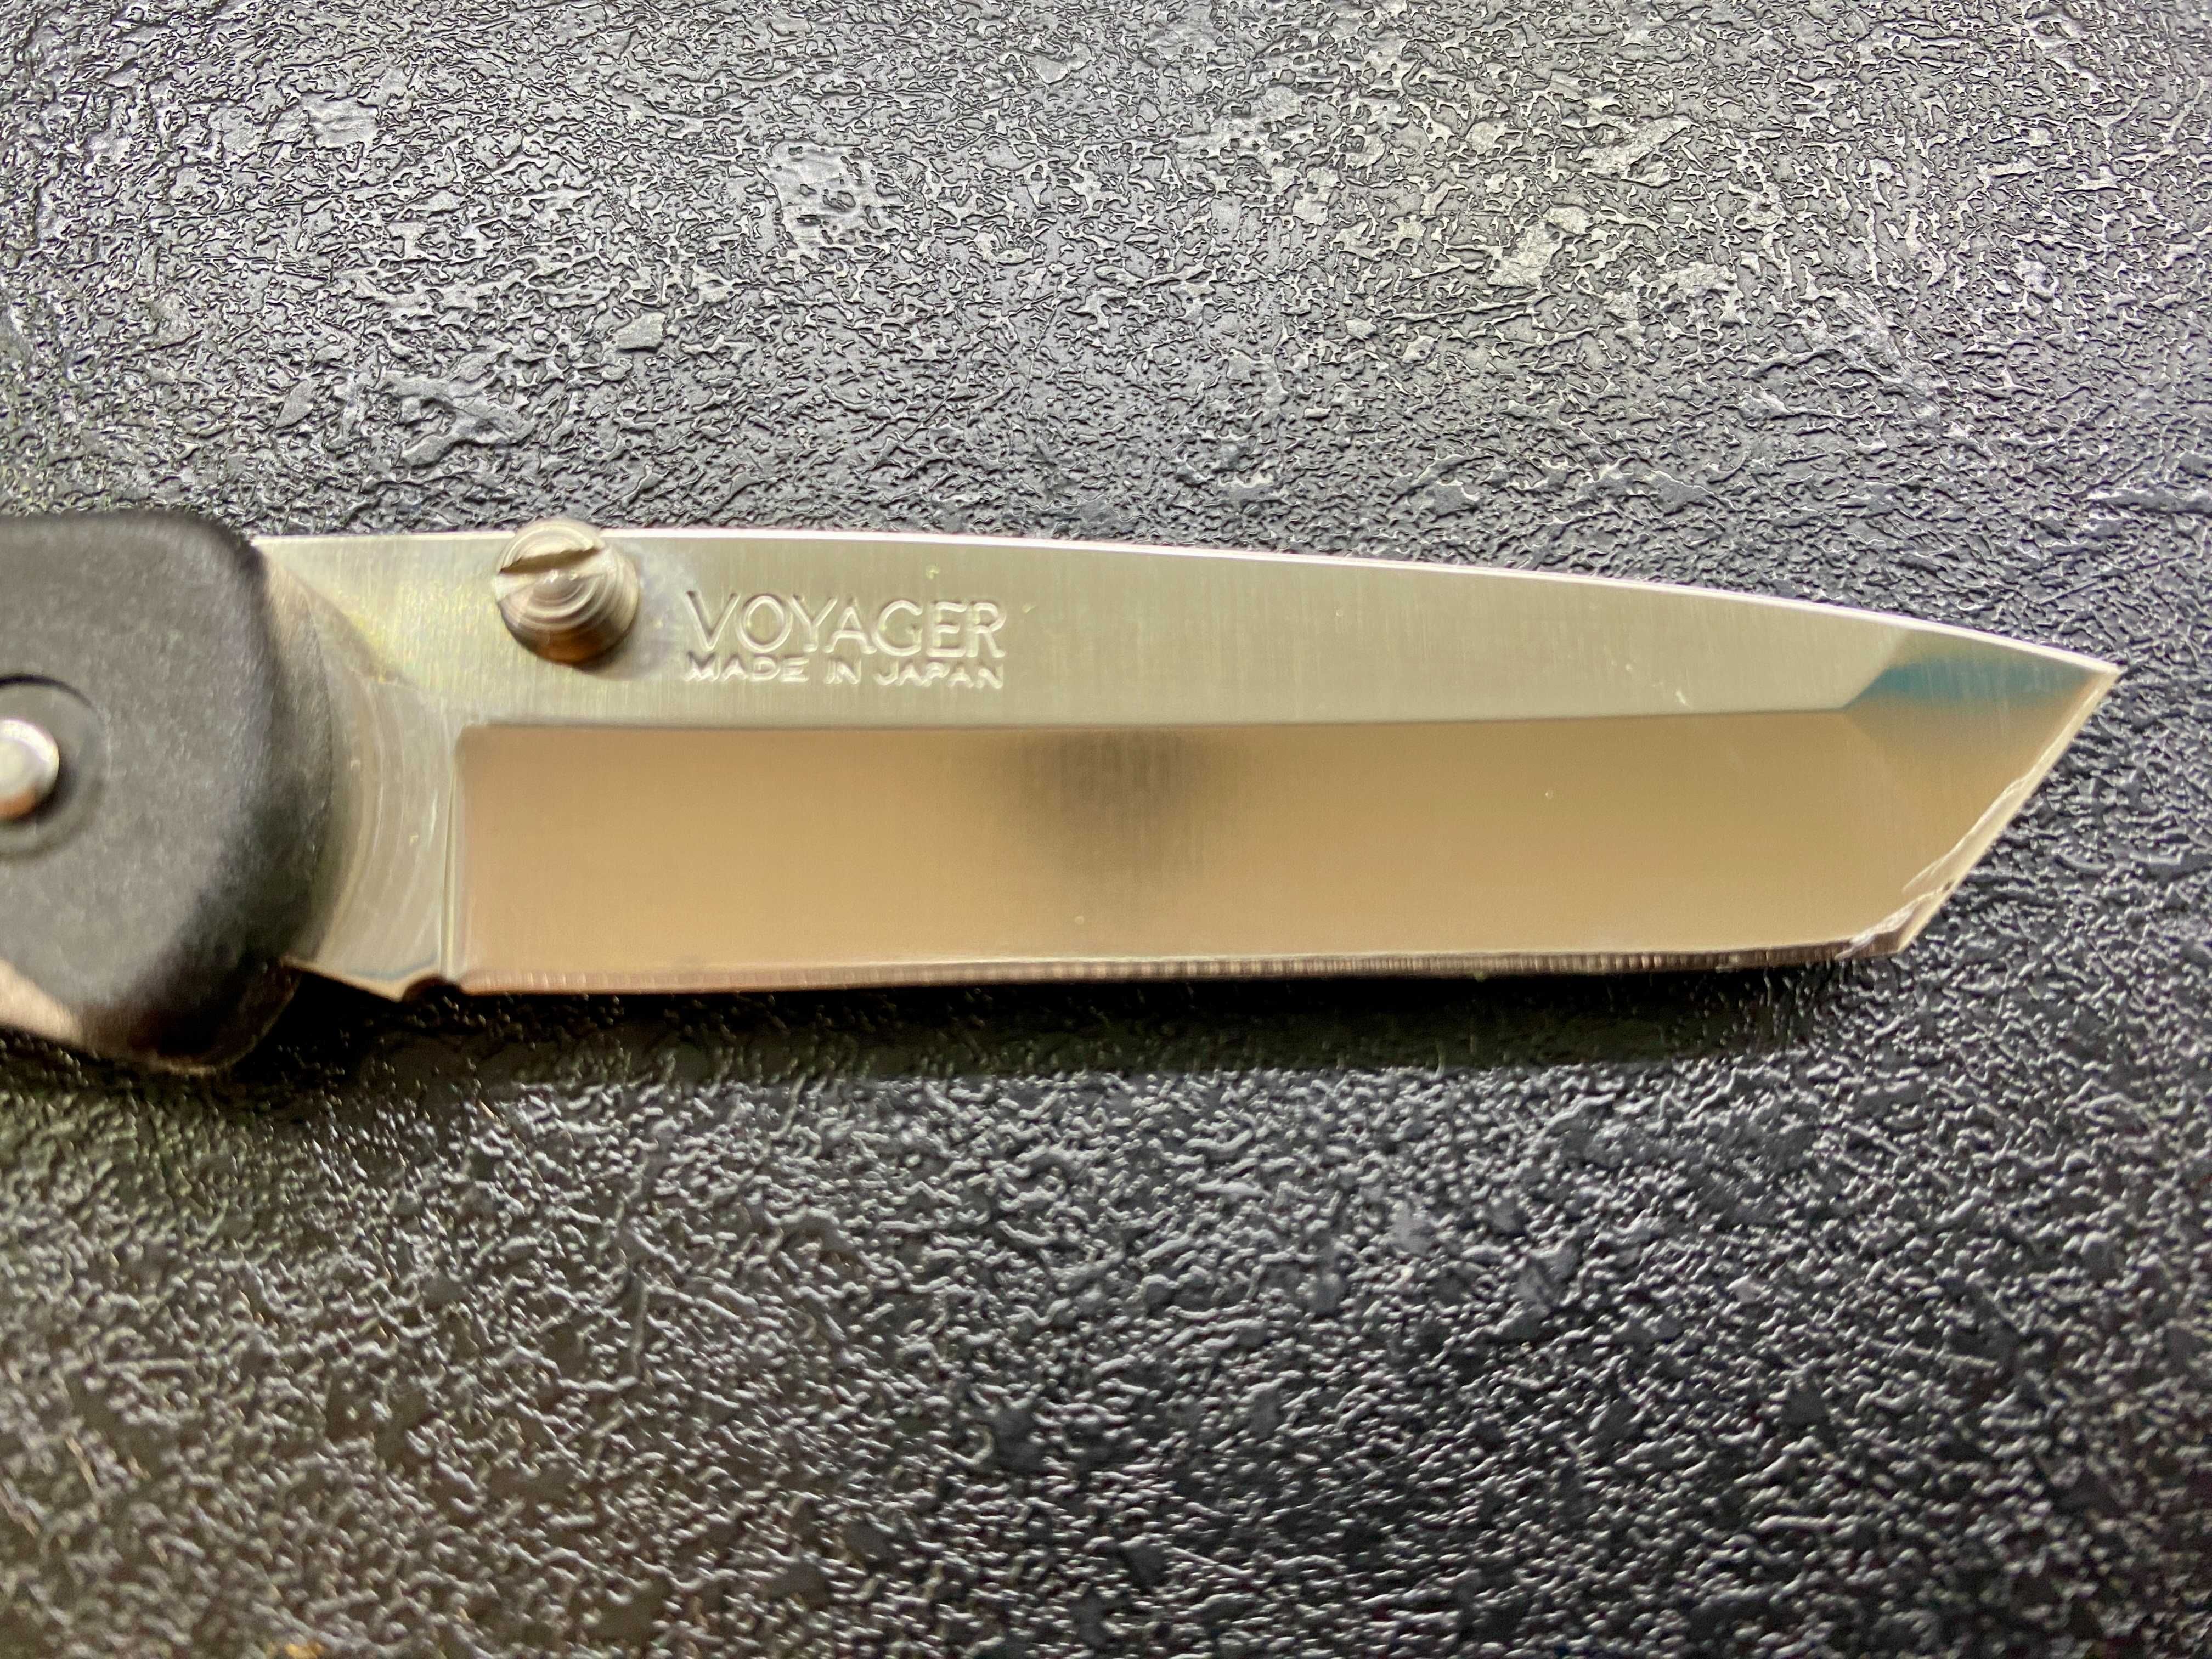 Cold Steel Voyager Medium Tanto. Made in Japan